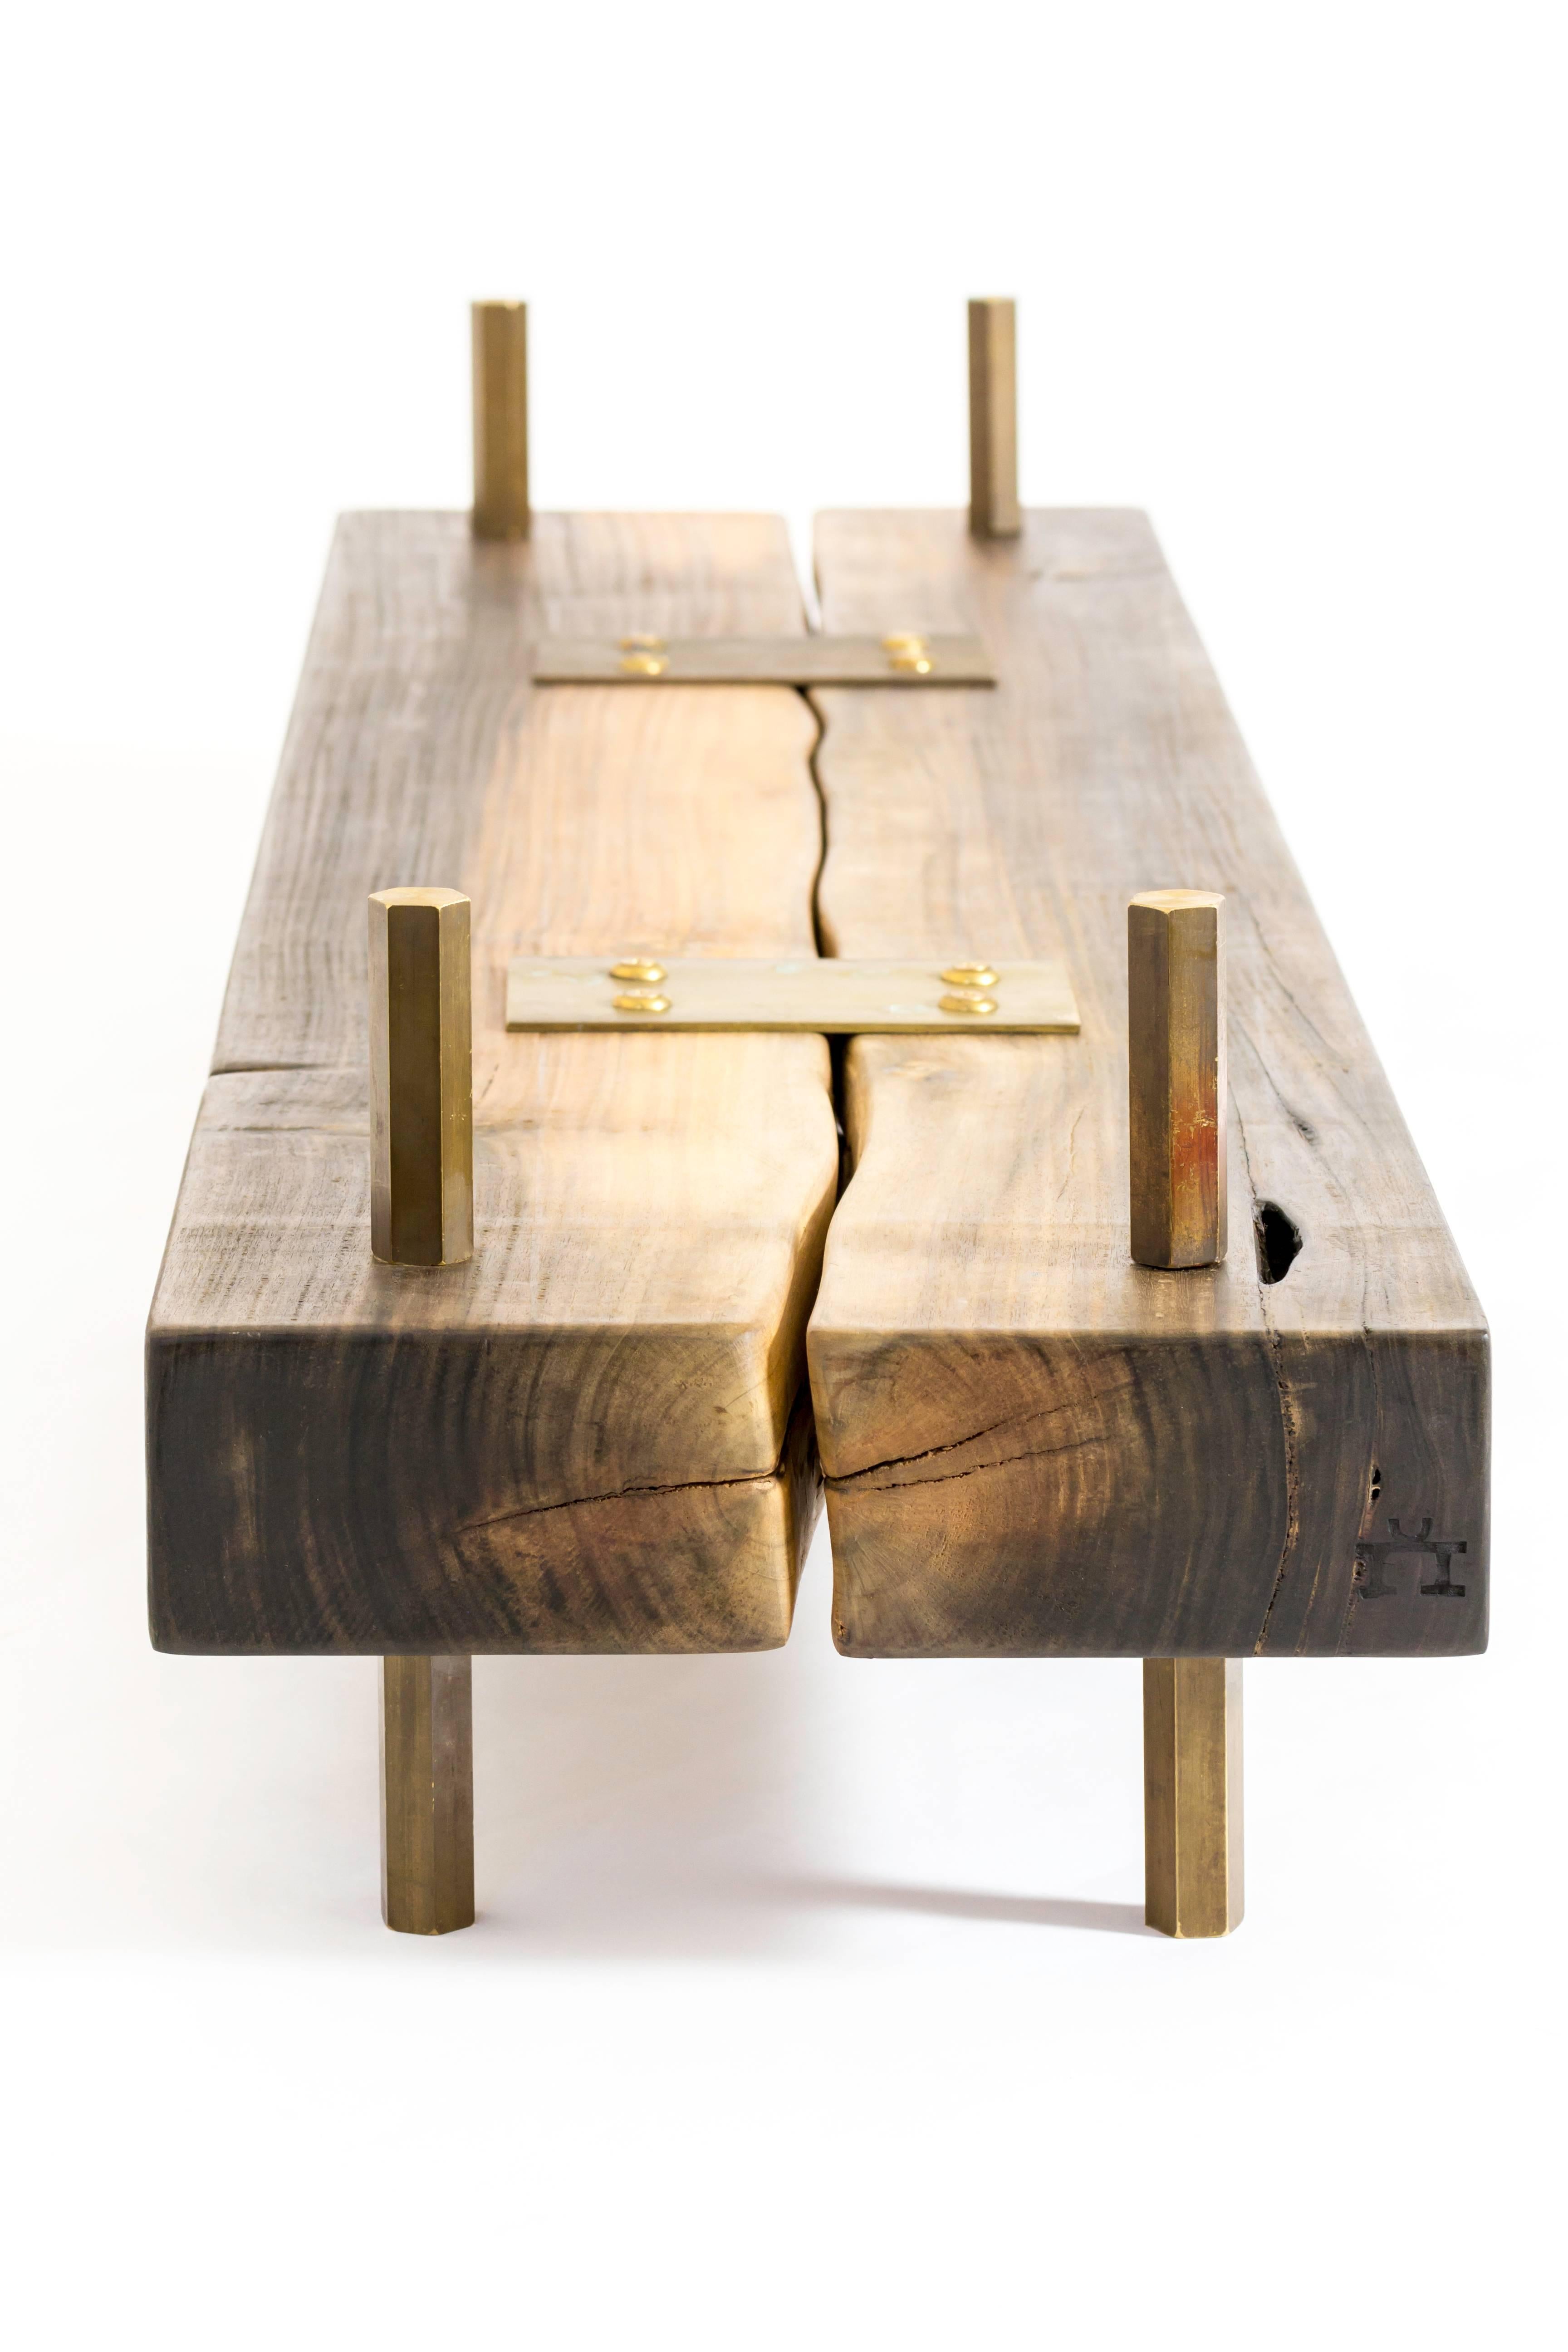 Reclaimed Wood Rectangular Connection of Mahoe Wood, Brass Legs & Glass Cocktail, Coffee Table